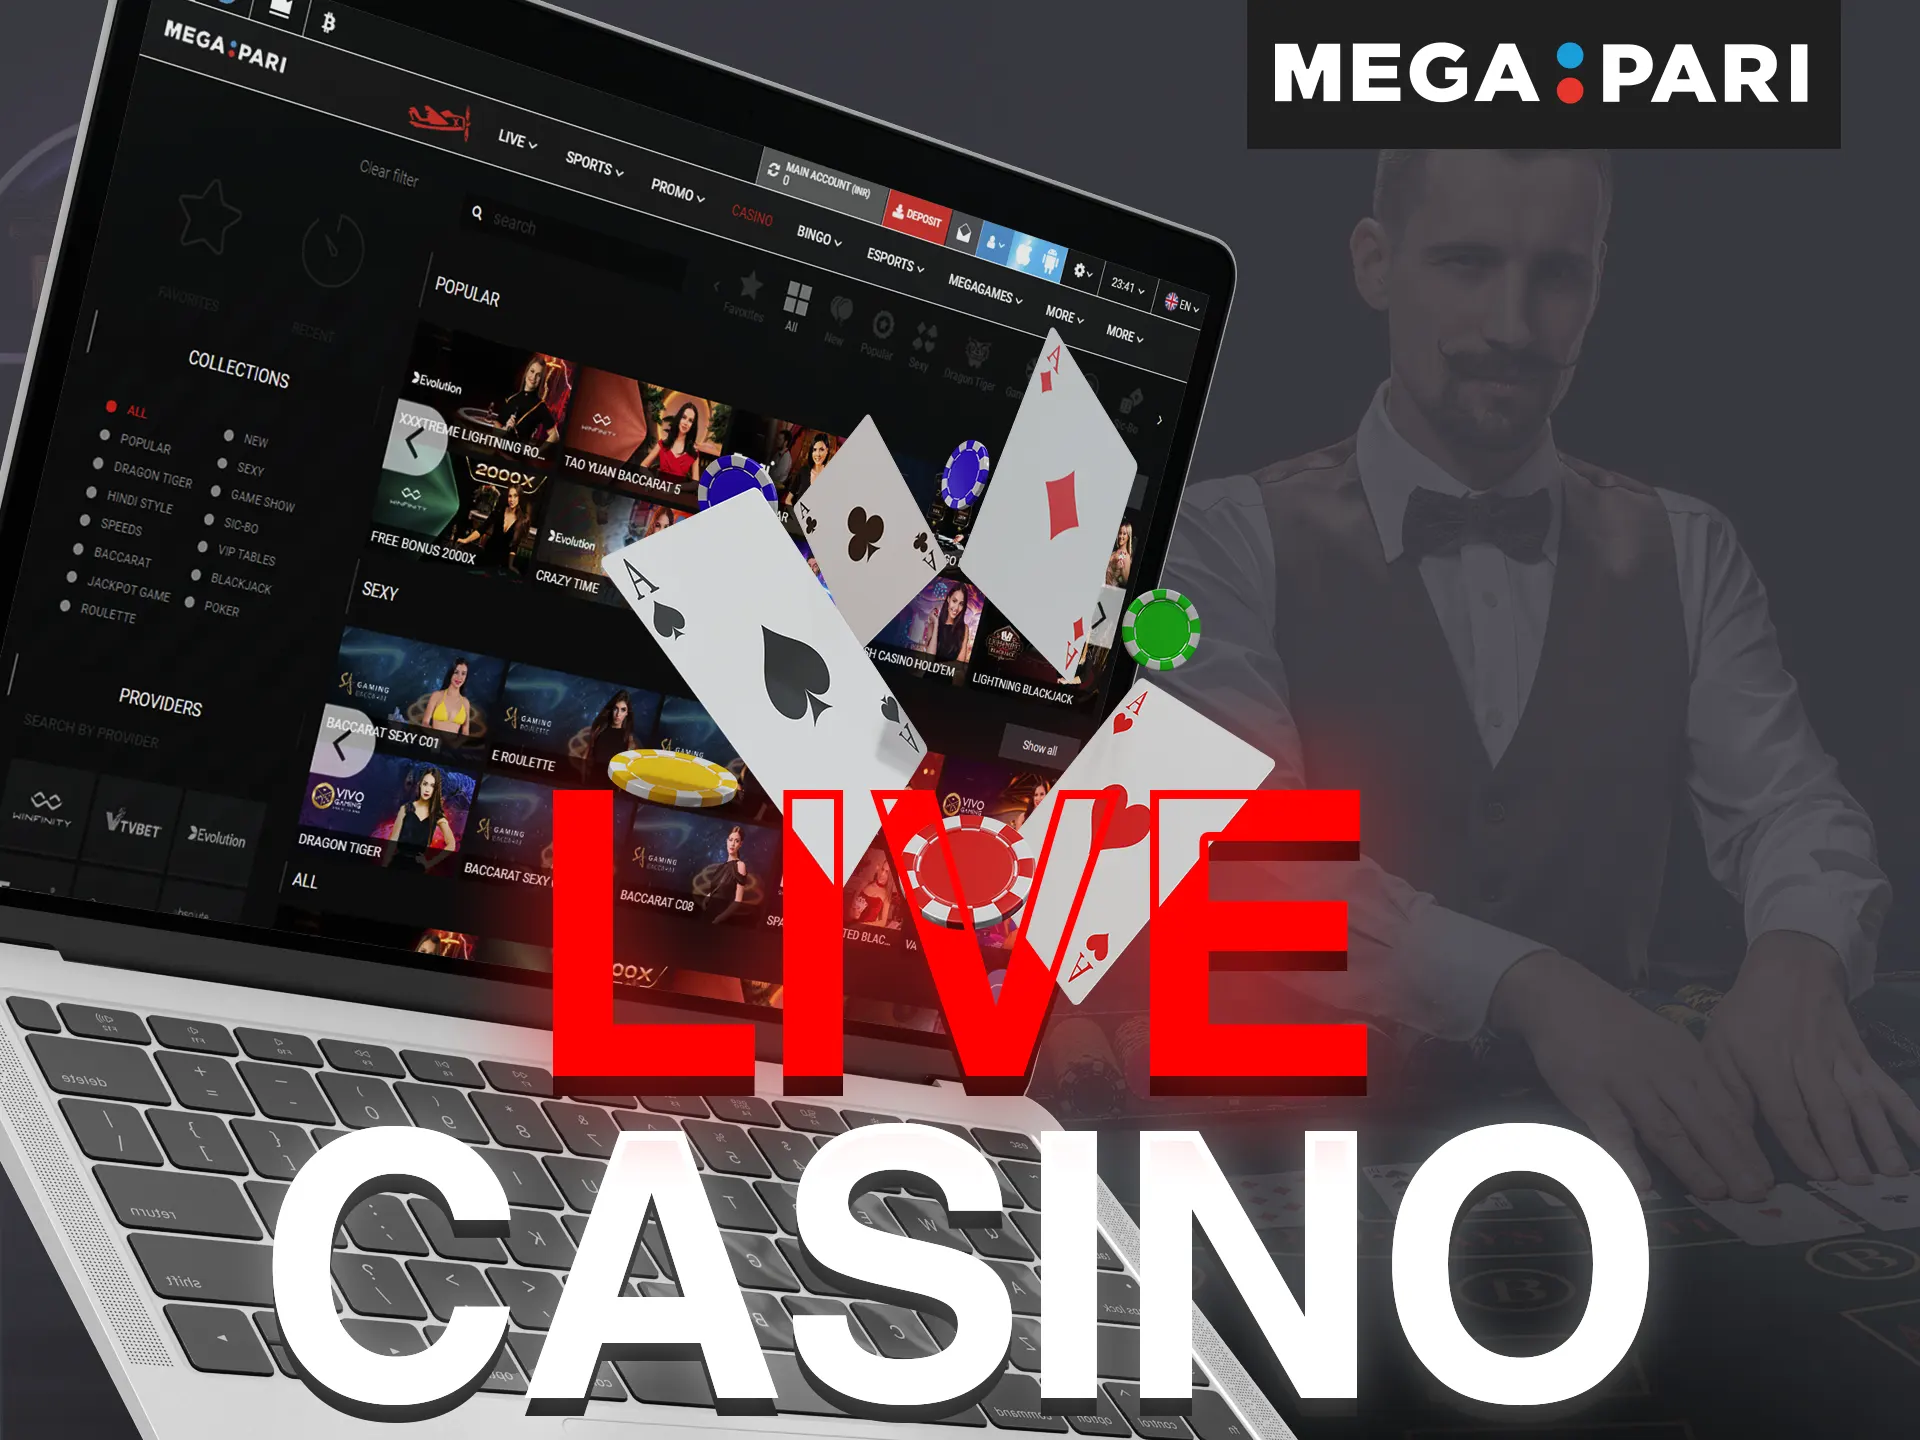 At Megapari live casino, players can interact with live dealers in real time.